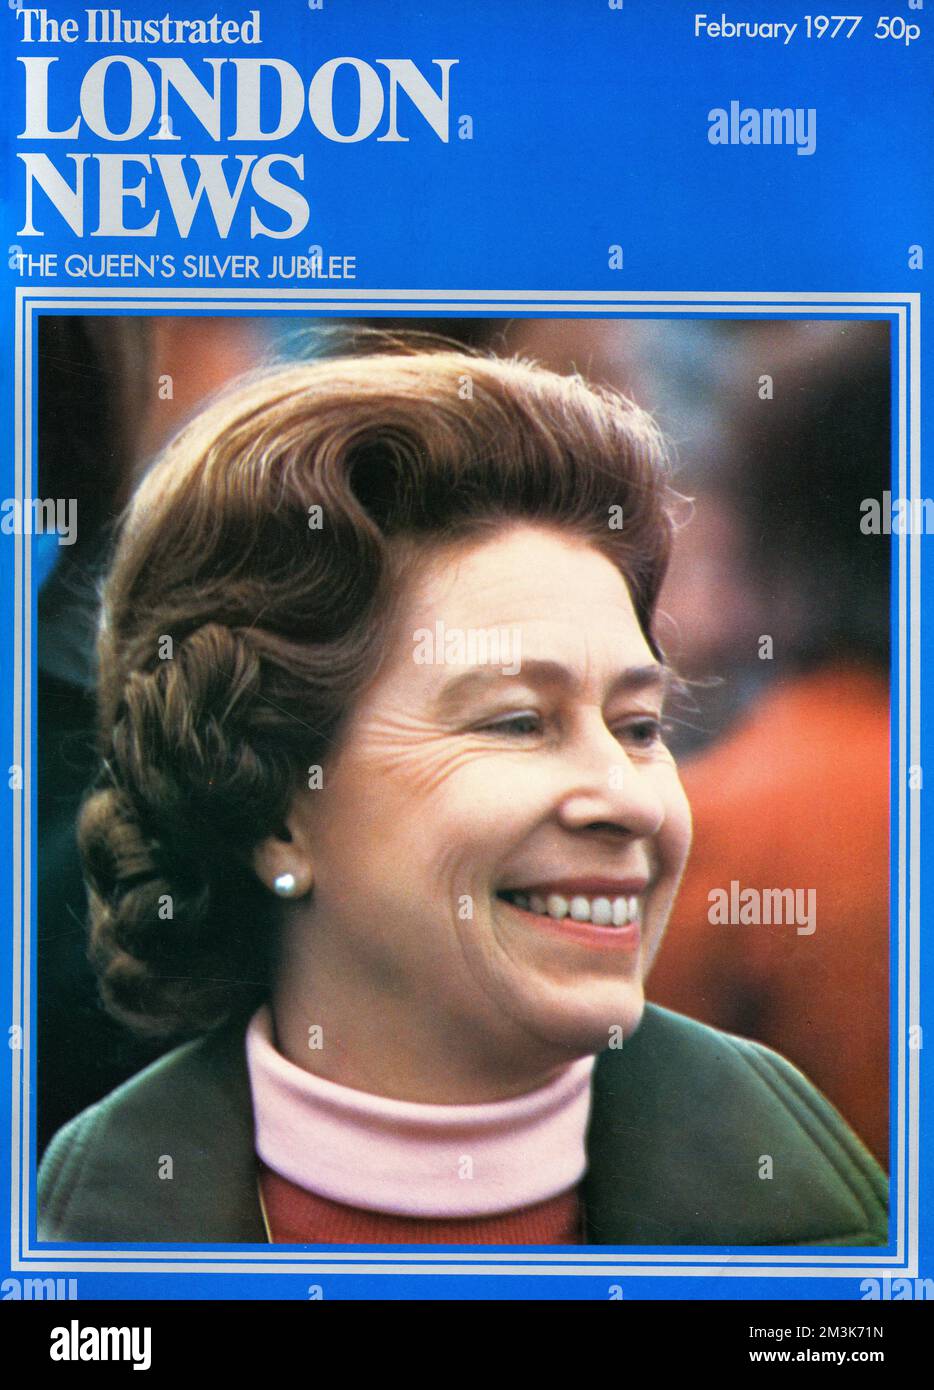 A front cover of The Illustrated London News showing a smiling Queen Elizabeth II in the year of her Silver Jubilee.     Date: 01/02/1977 Stock Photo